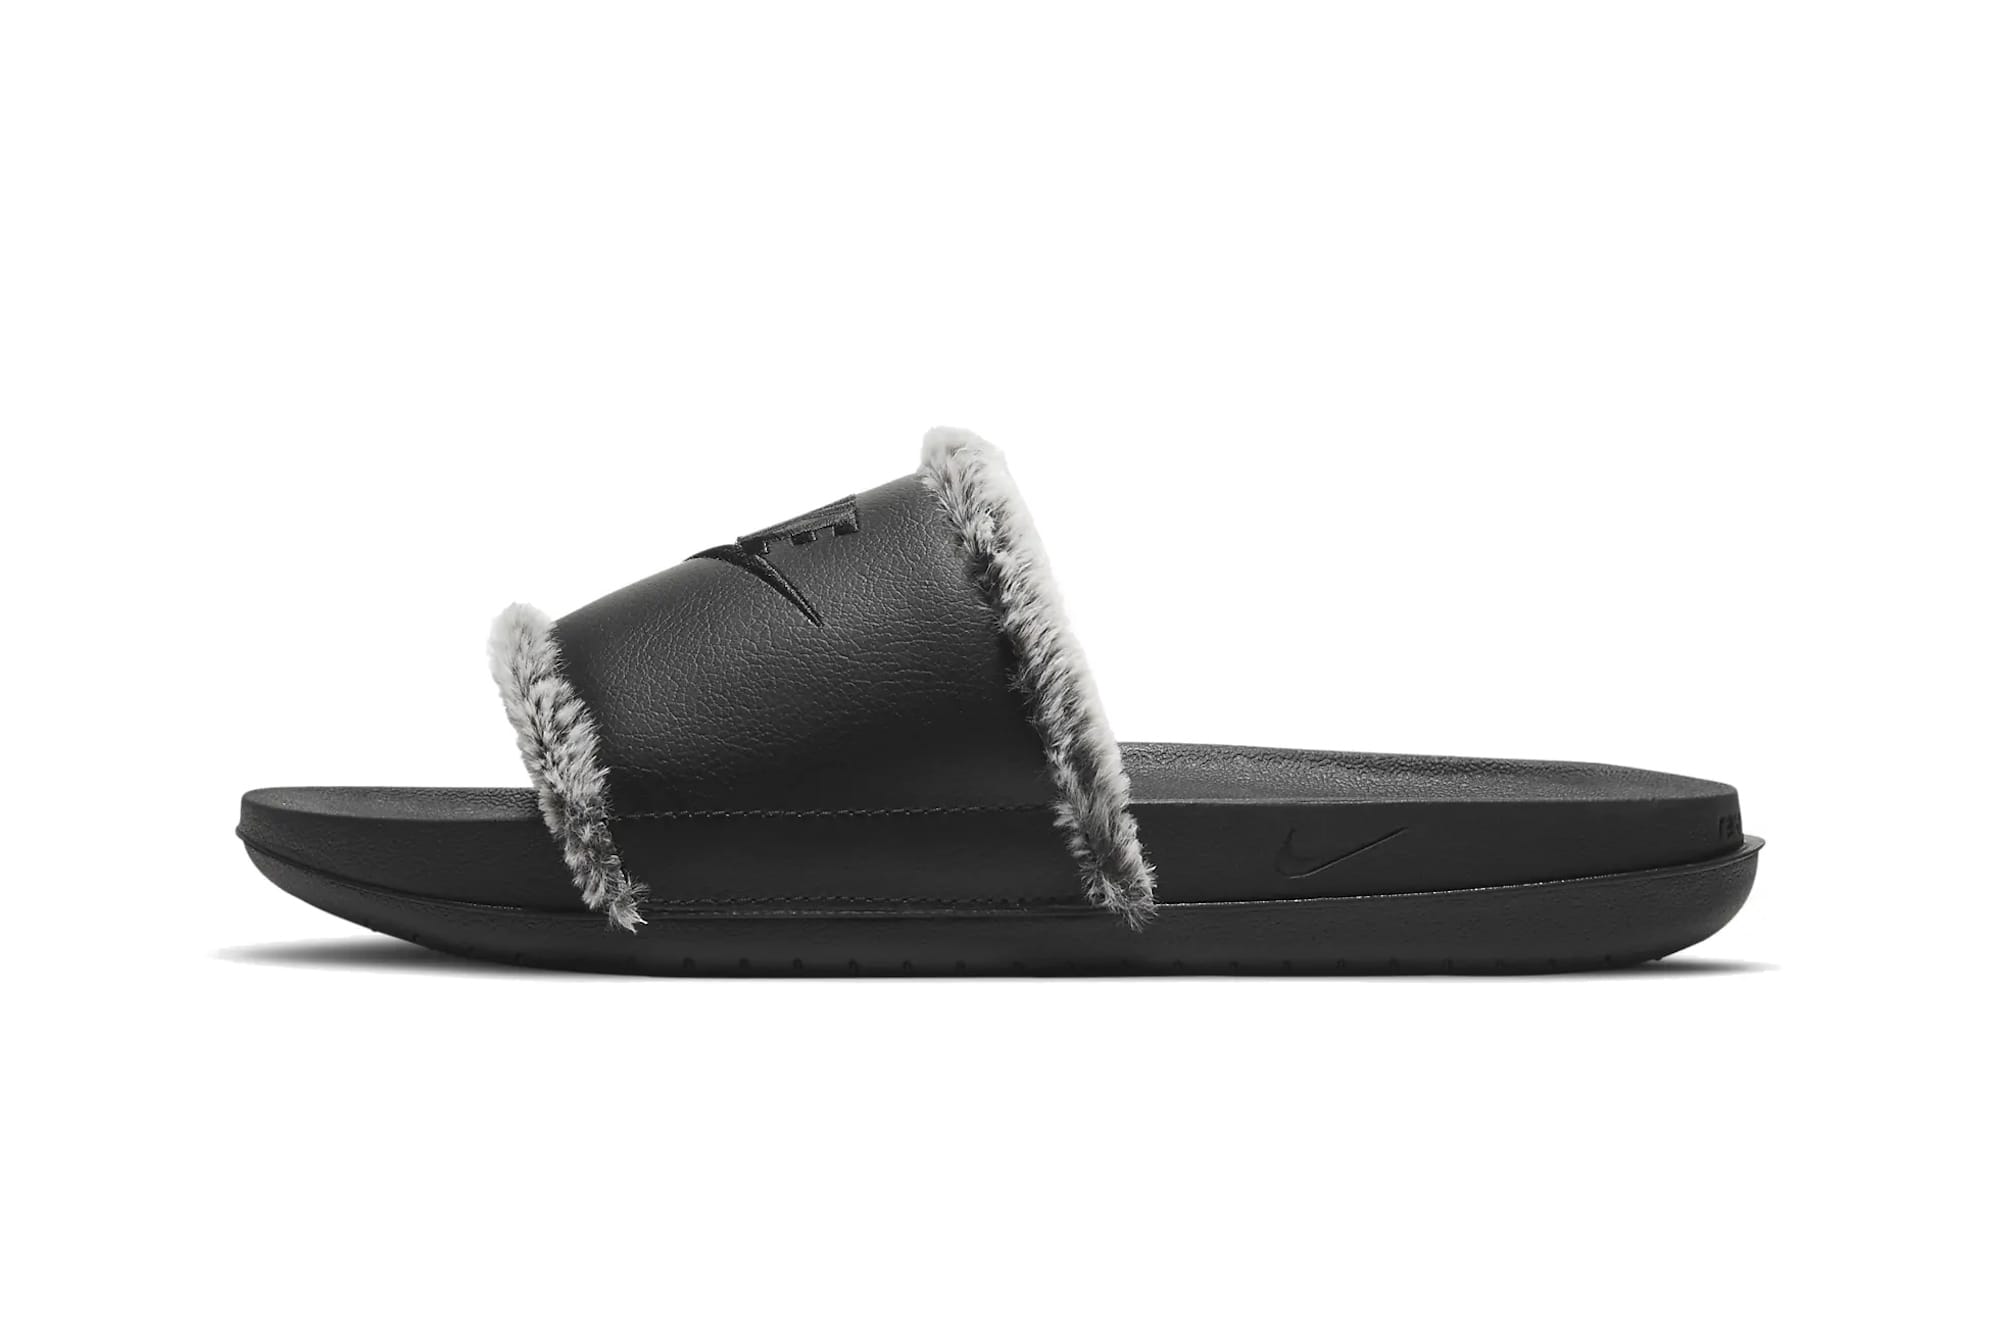 sandals with fur inside